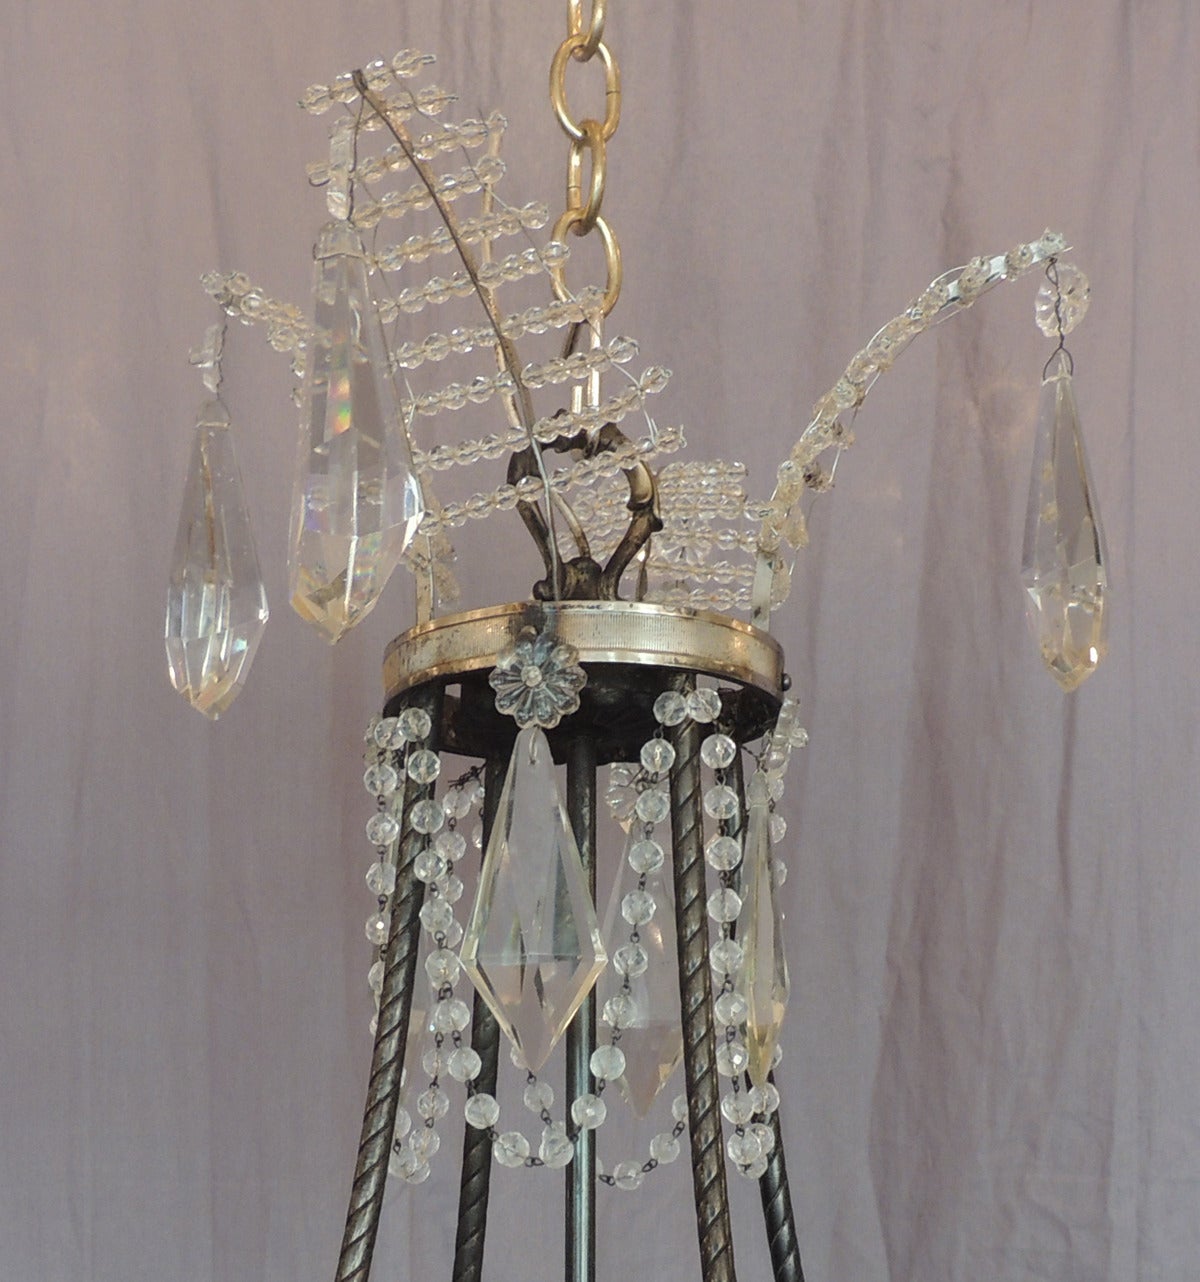 This chandelier was made in Baltic region of Europe in the early-20th century and was made to reflect the Russian Empire style. The chandelier features four crystal fern leaves at the top canopy each with crystal prisms. The stem piece is decorated